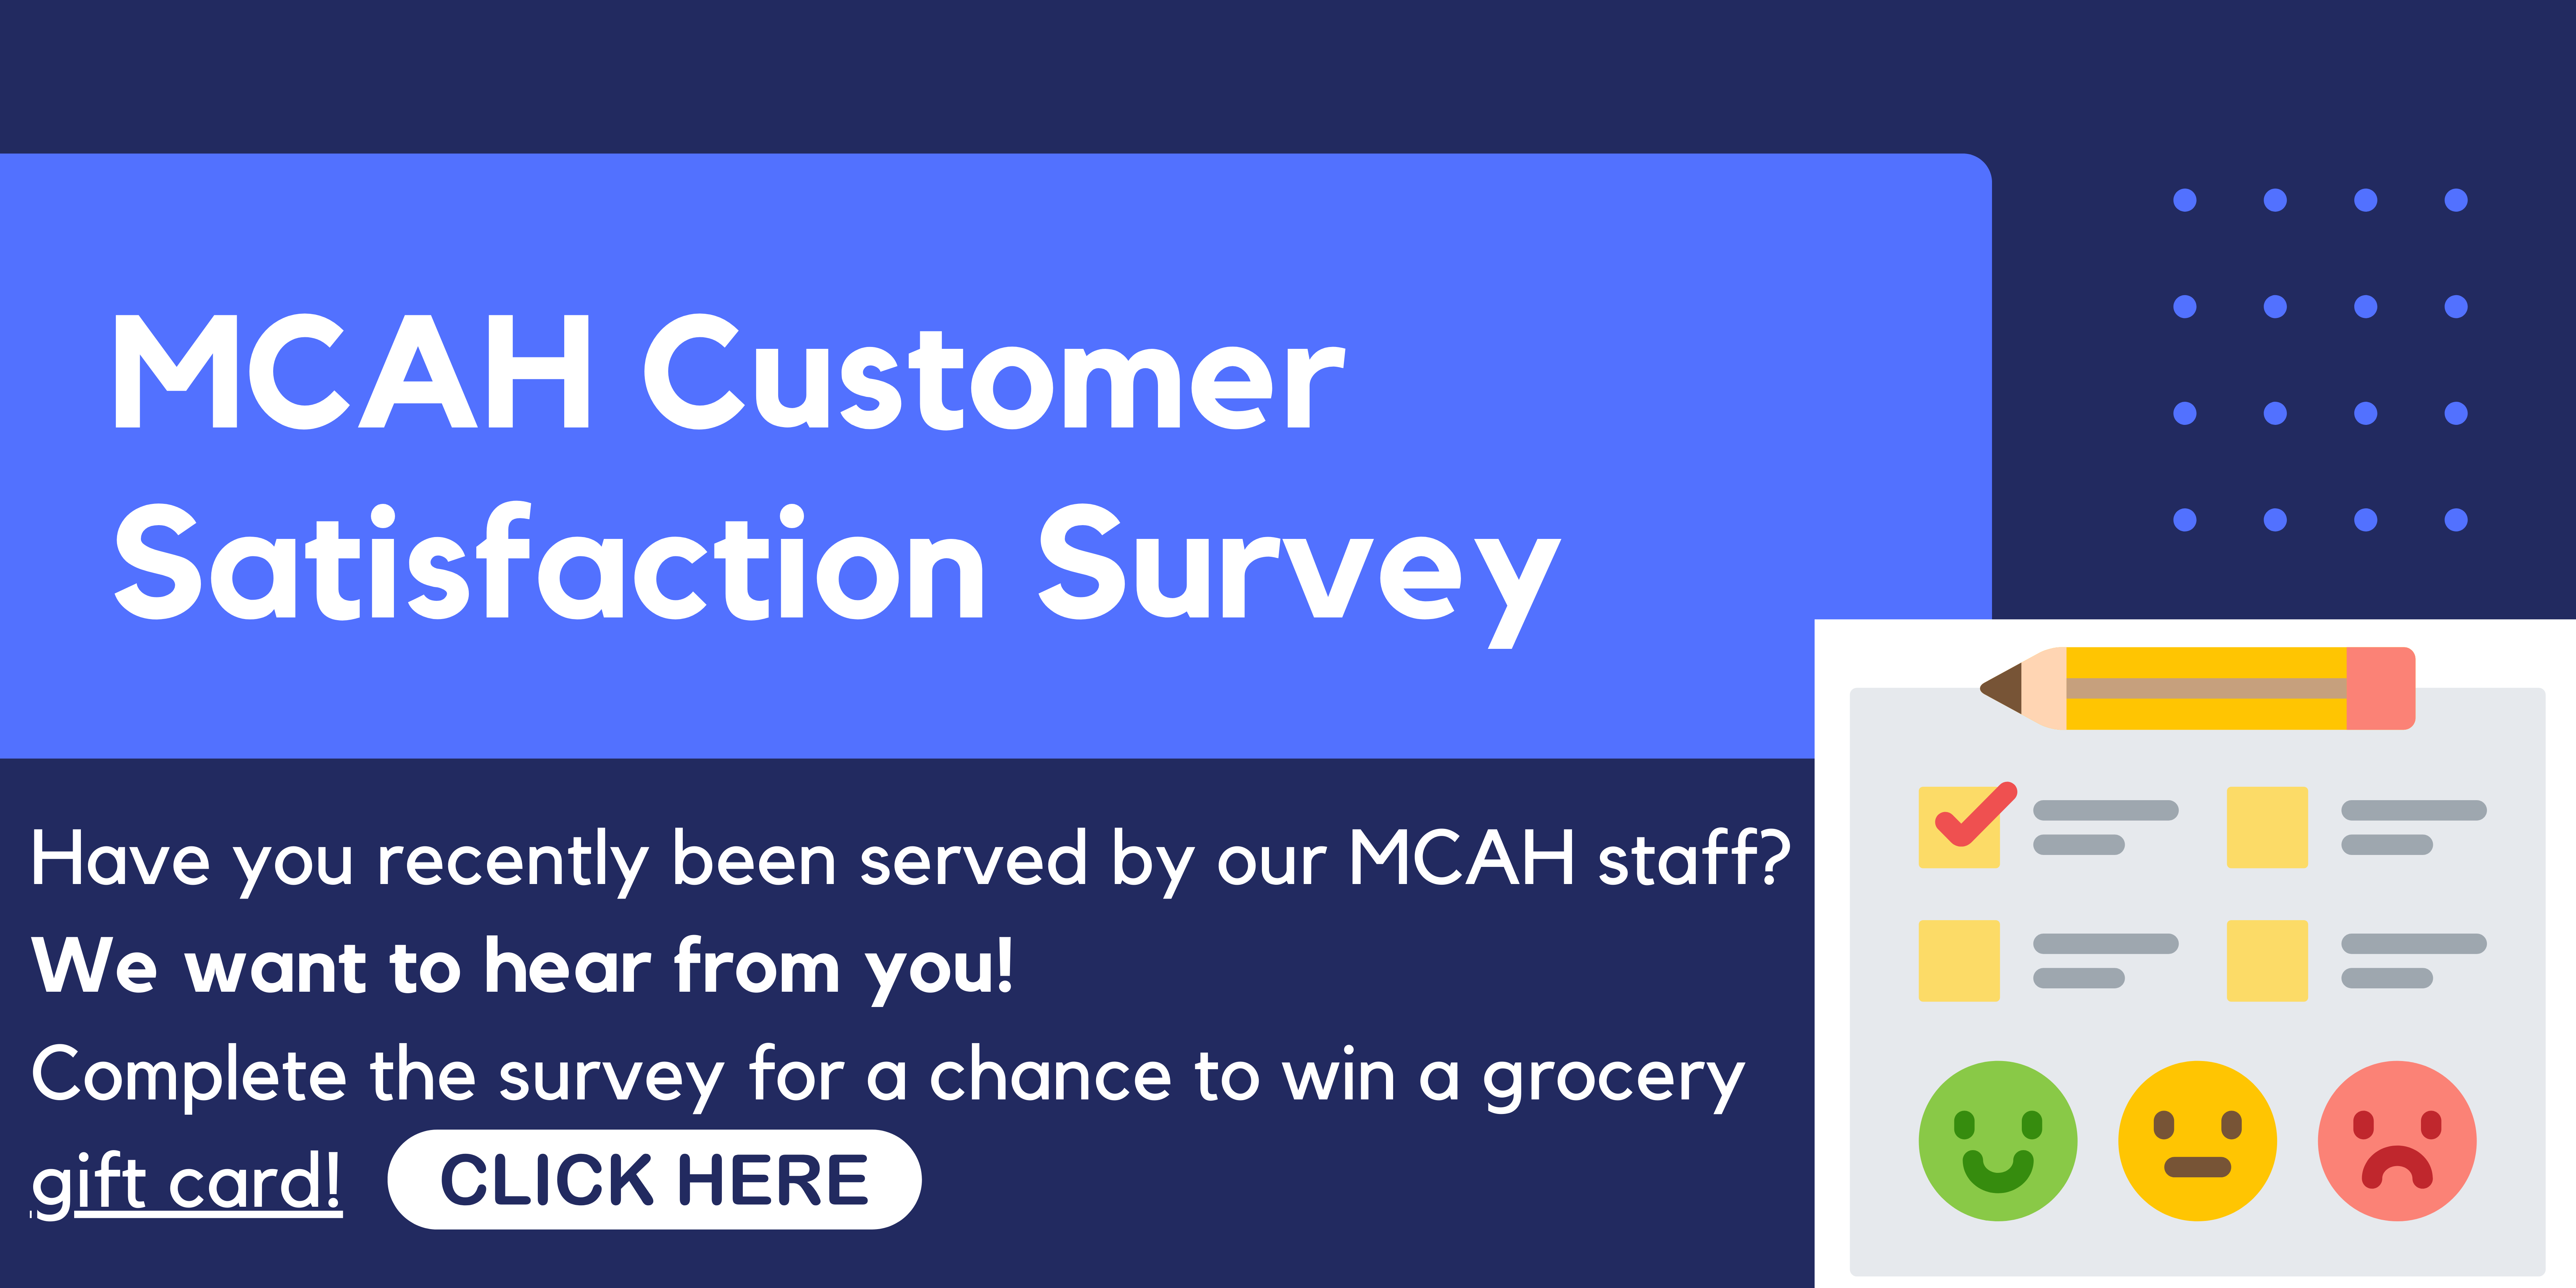 MCAH Customer Satisfaction Survey: Have you recently been served by our Maternal Child & Adolescent Health Services staff? We want to hear from you! Complete the survey for a chance to win a grocery gift card